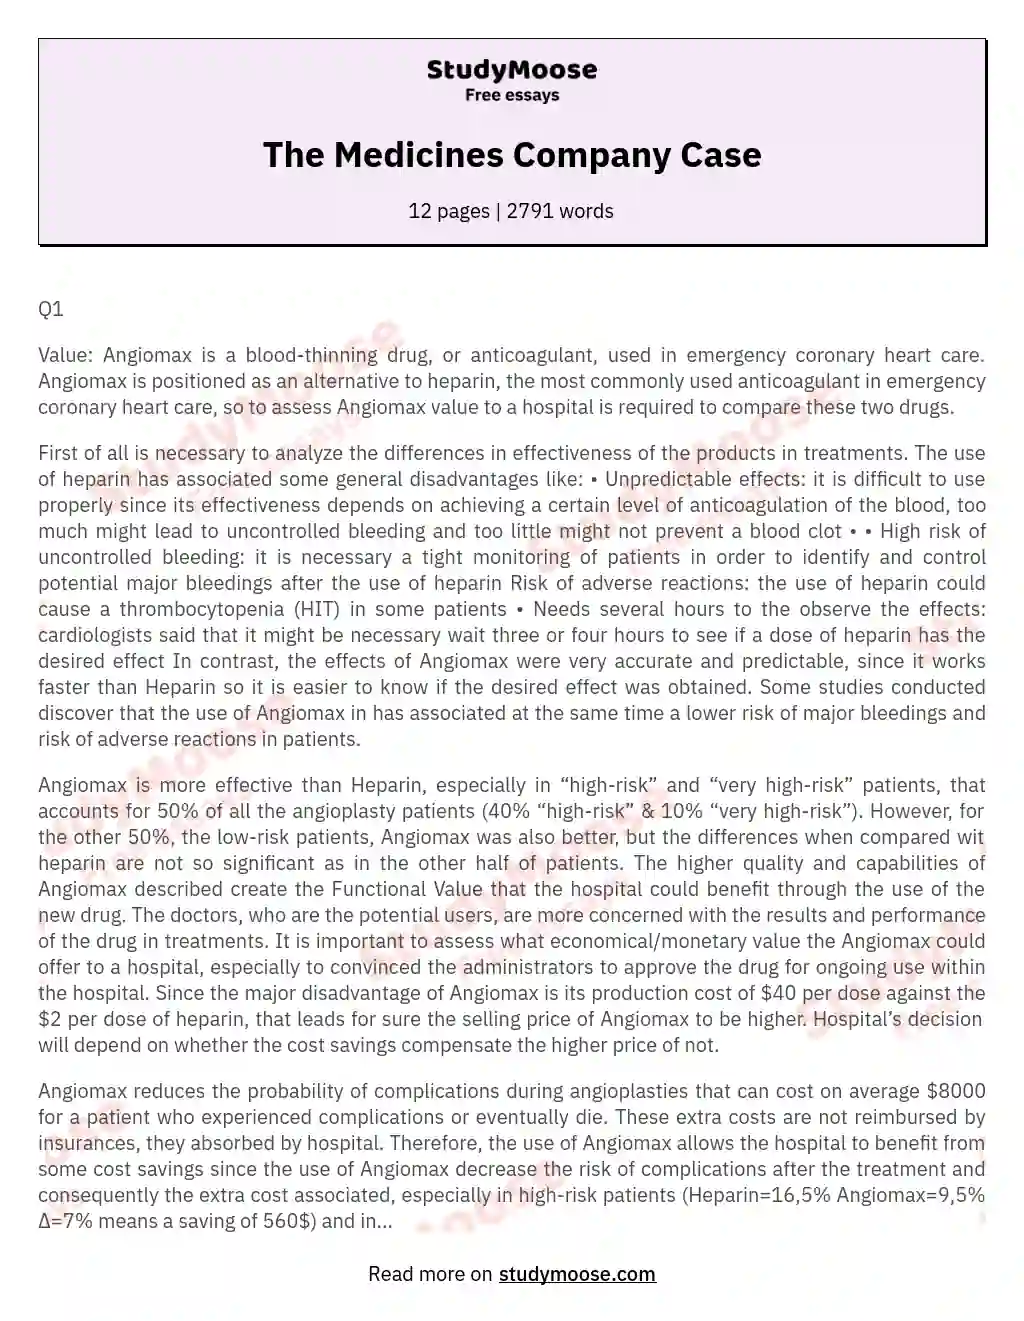 Comparing Angiomax and Heparin in Emergency Heart Care essay